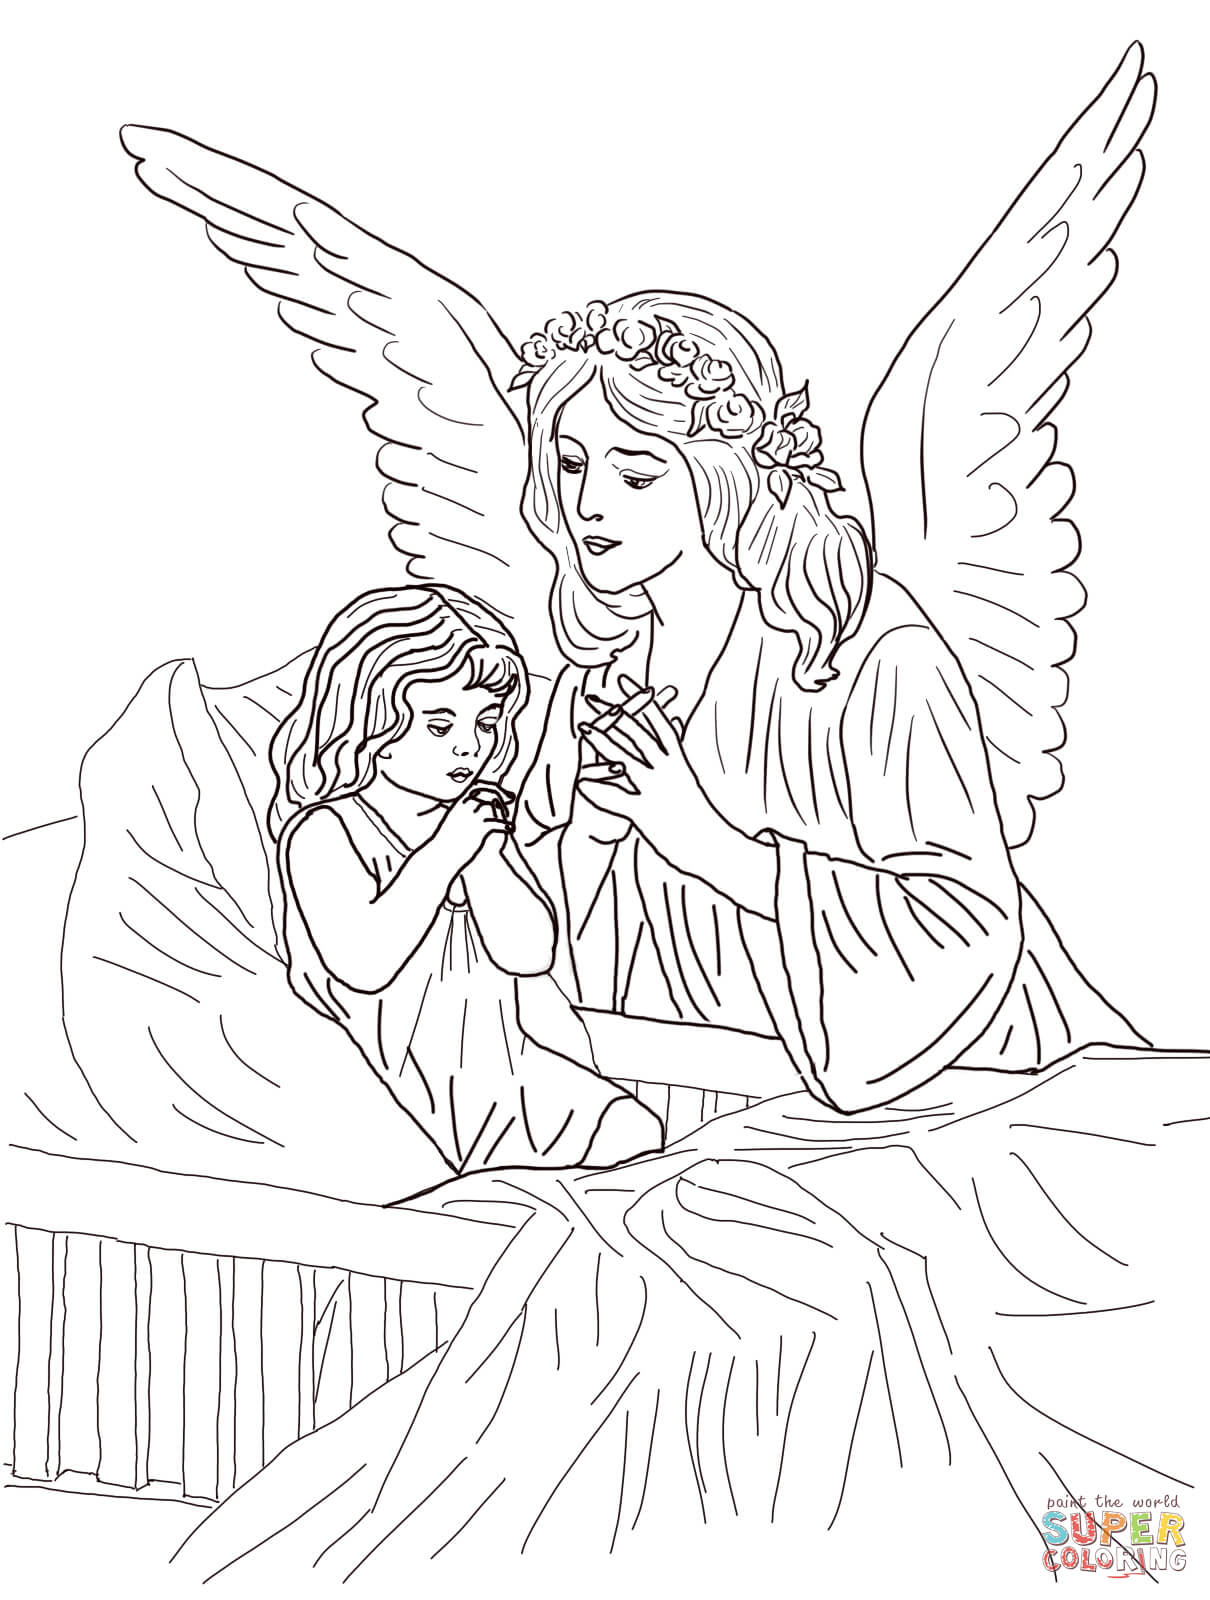 Angel - Coloring Pages for Kids and for Adults